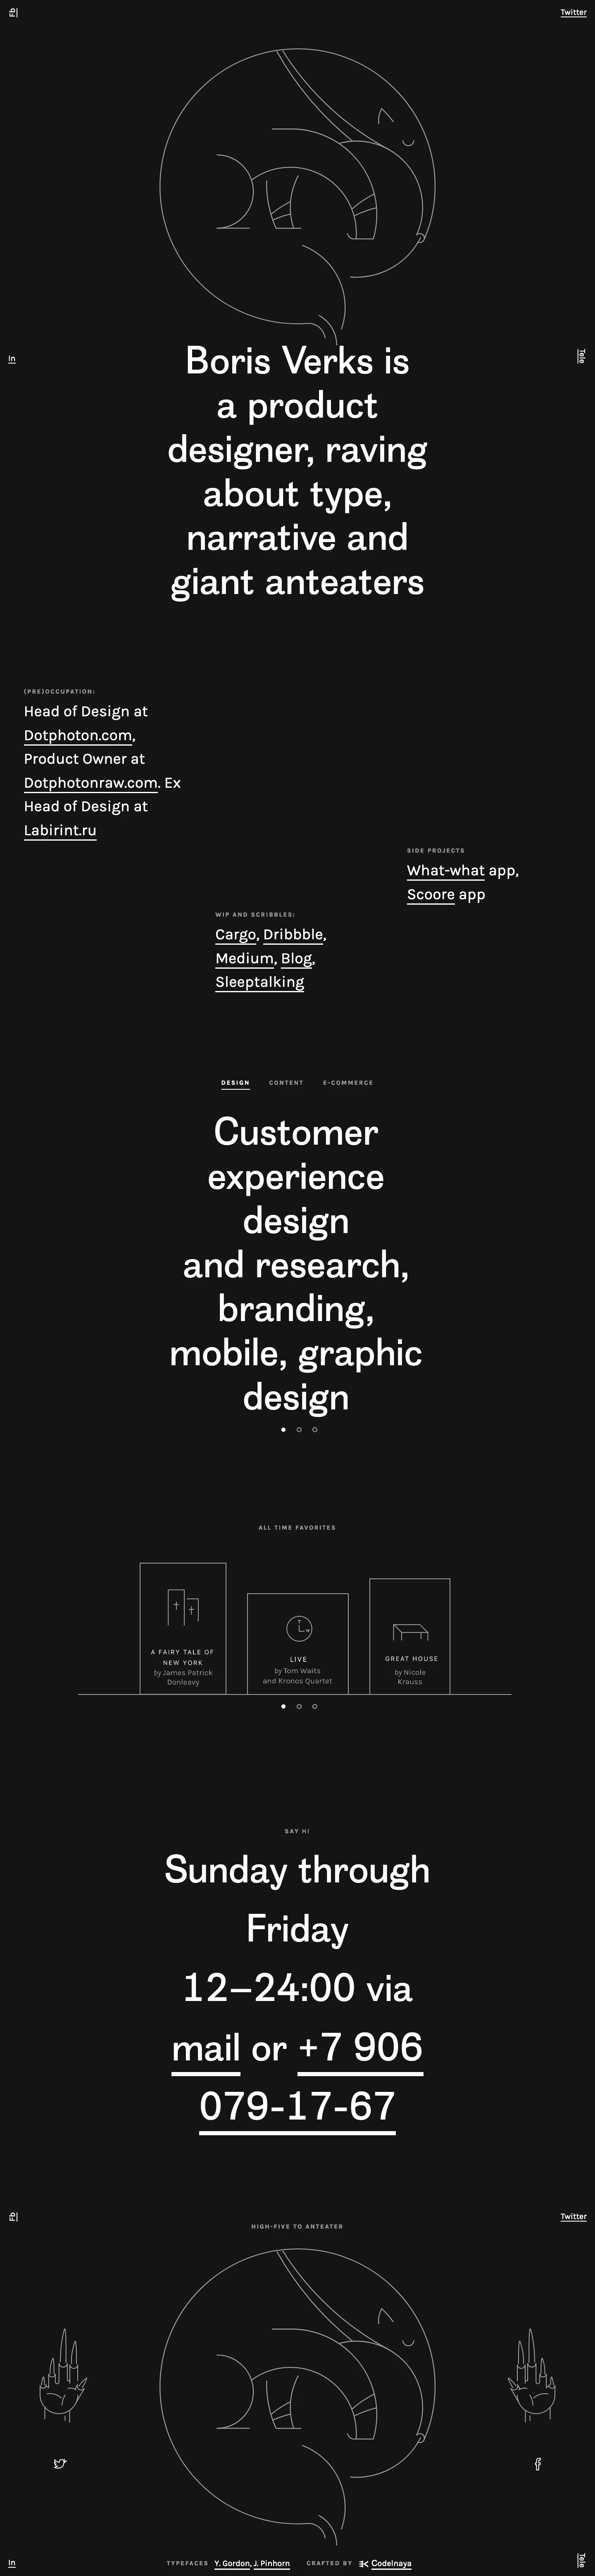 Boris Verks Landing Page Example: Boris Verks is a product designer, raving about type, narrative and giant anteaters